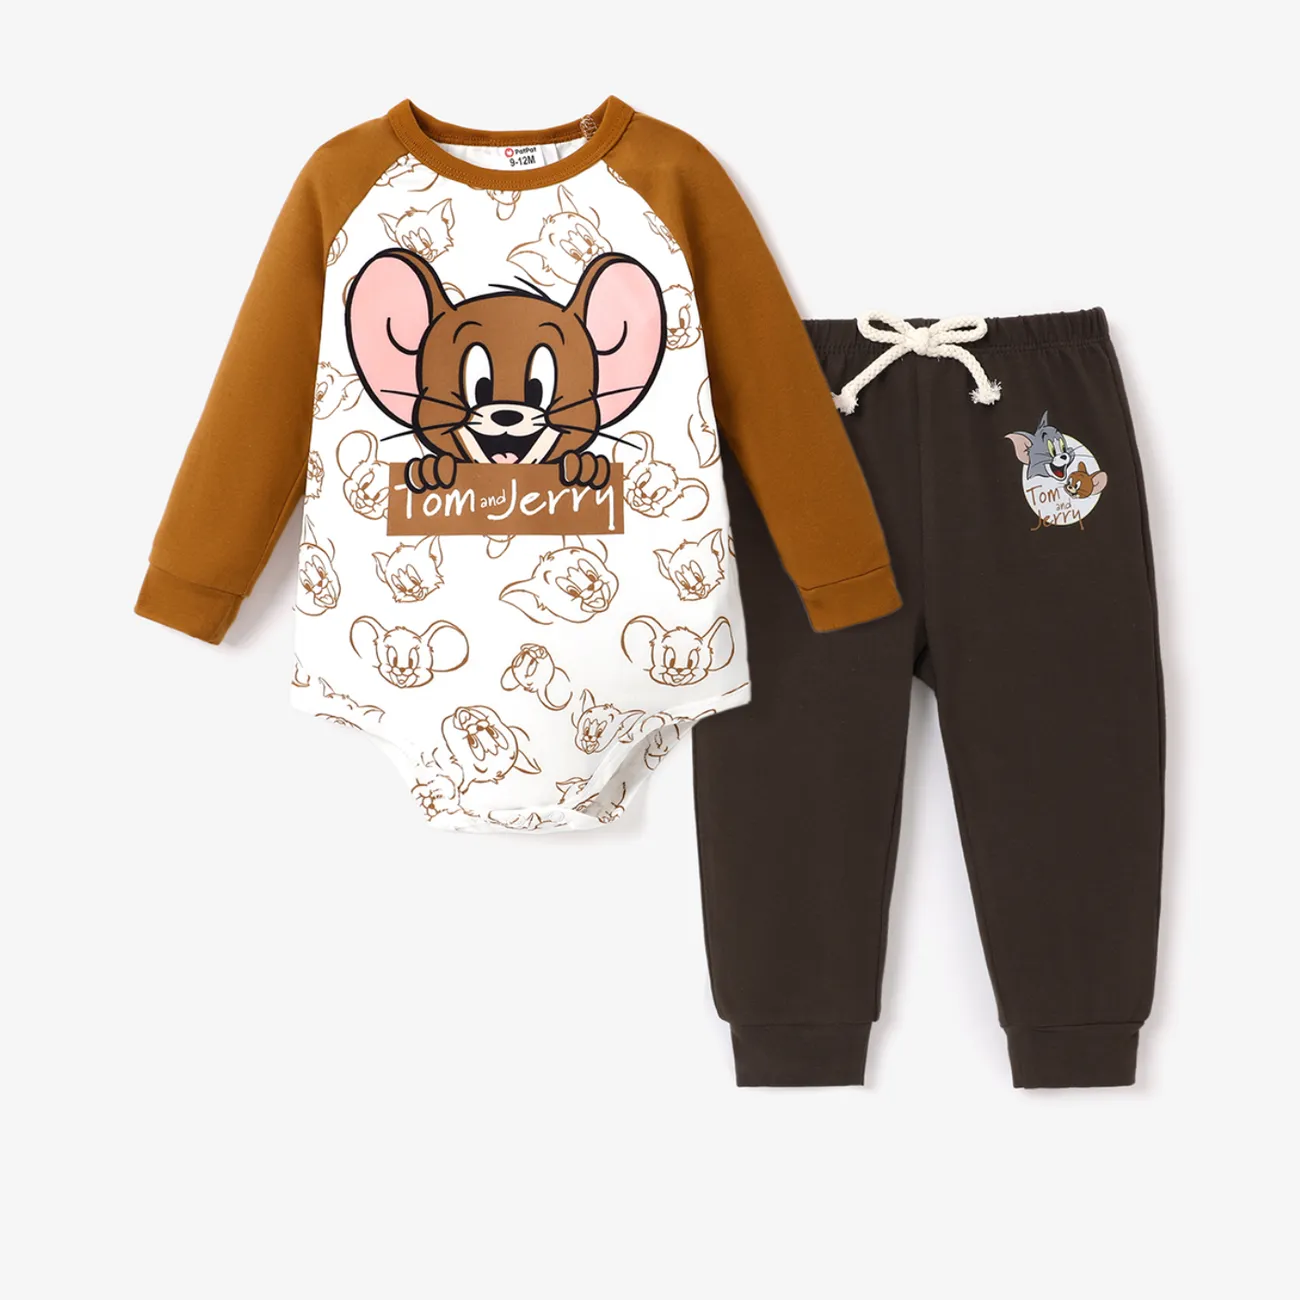 Tom and Jerry baby boy character graphic A romper or a pair of pants to wear with lighttan big image 1